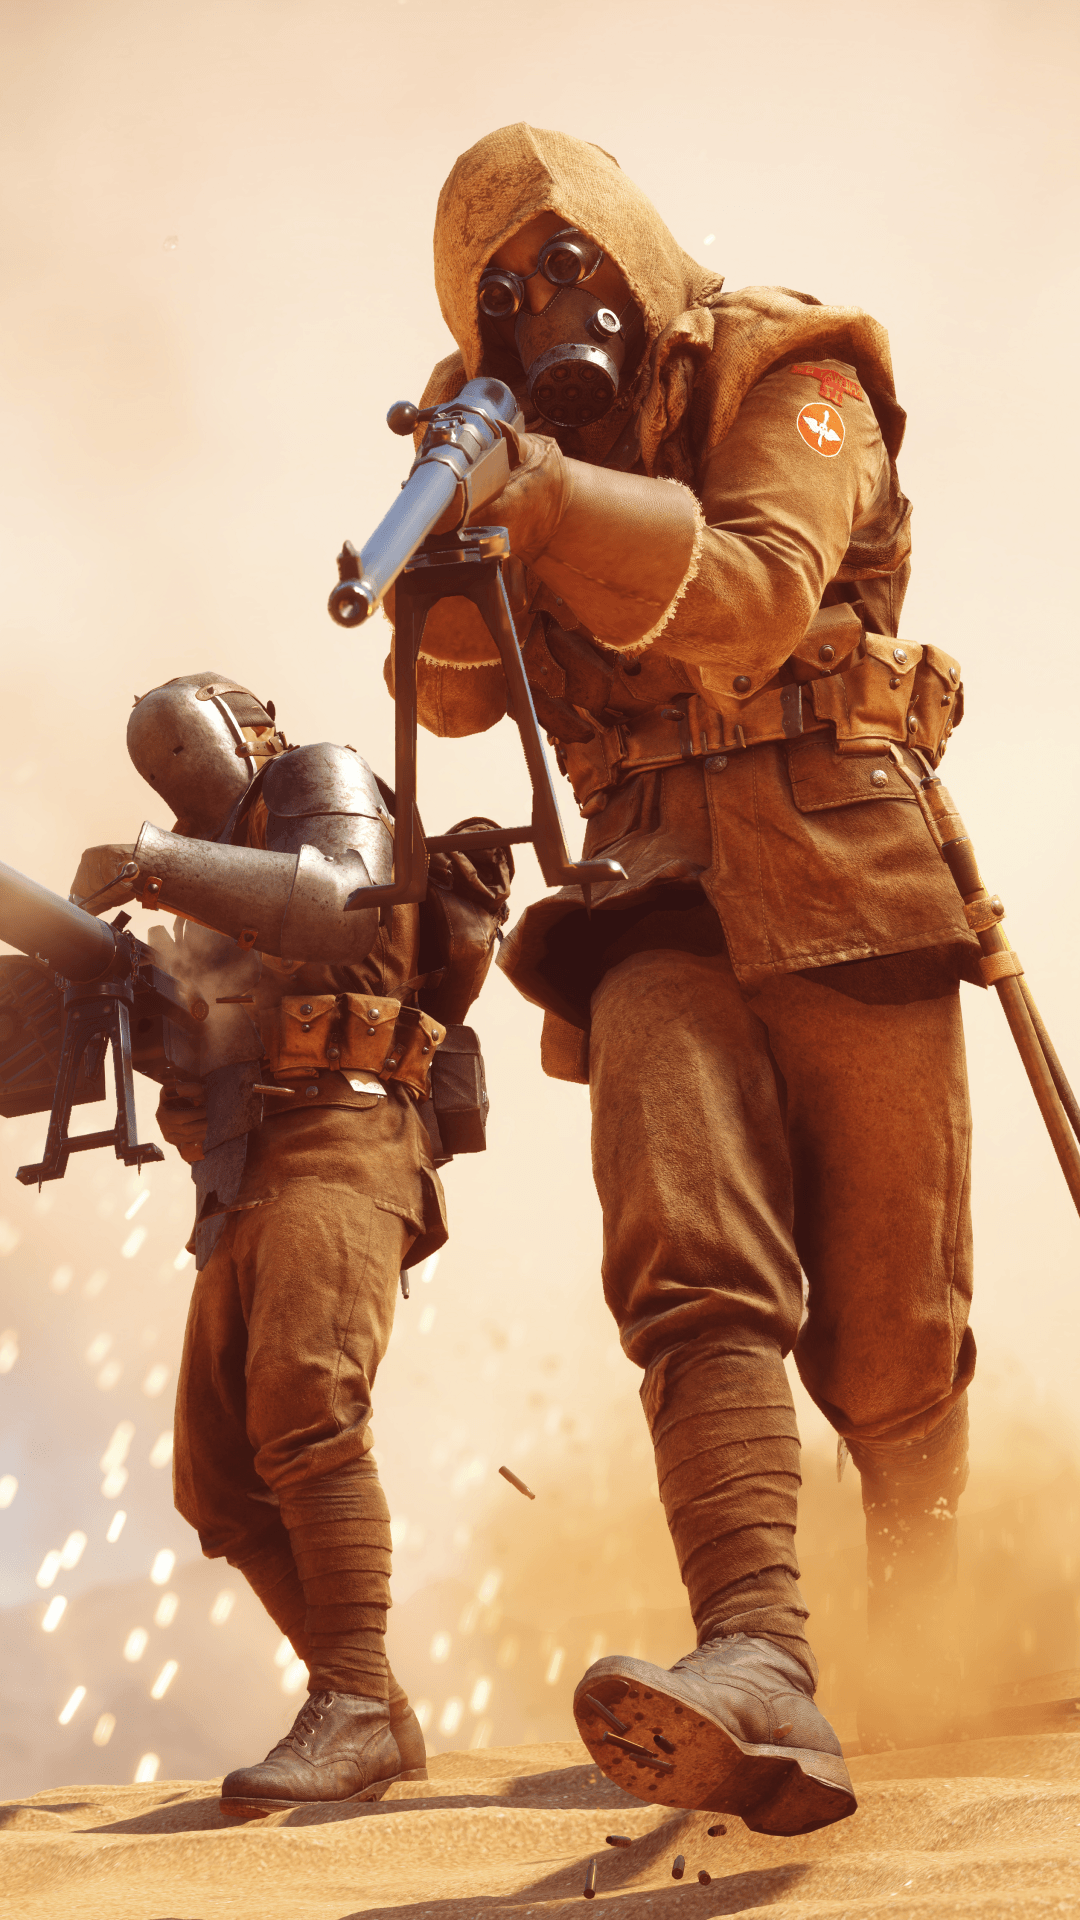 Battlefield V Iphone Wallpapers Top Free Battlefield V Iphone Backgrounds Wallpaperaccess